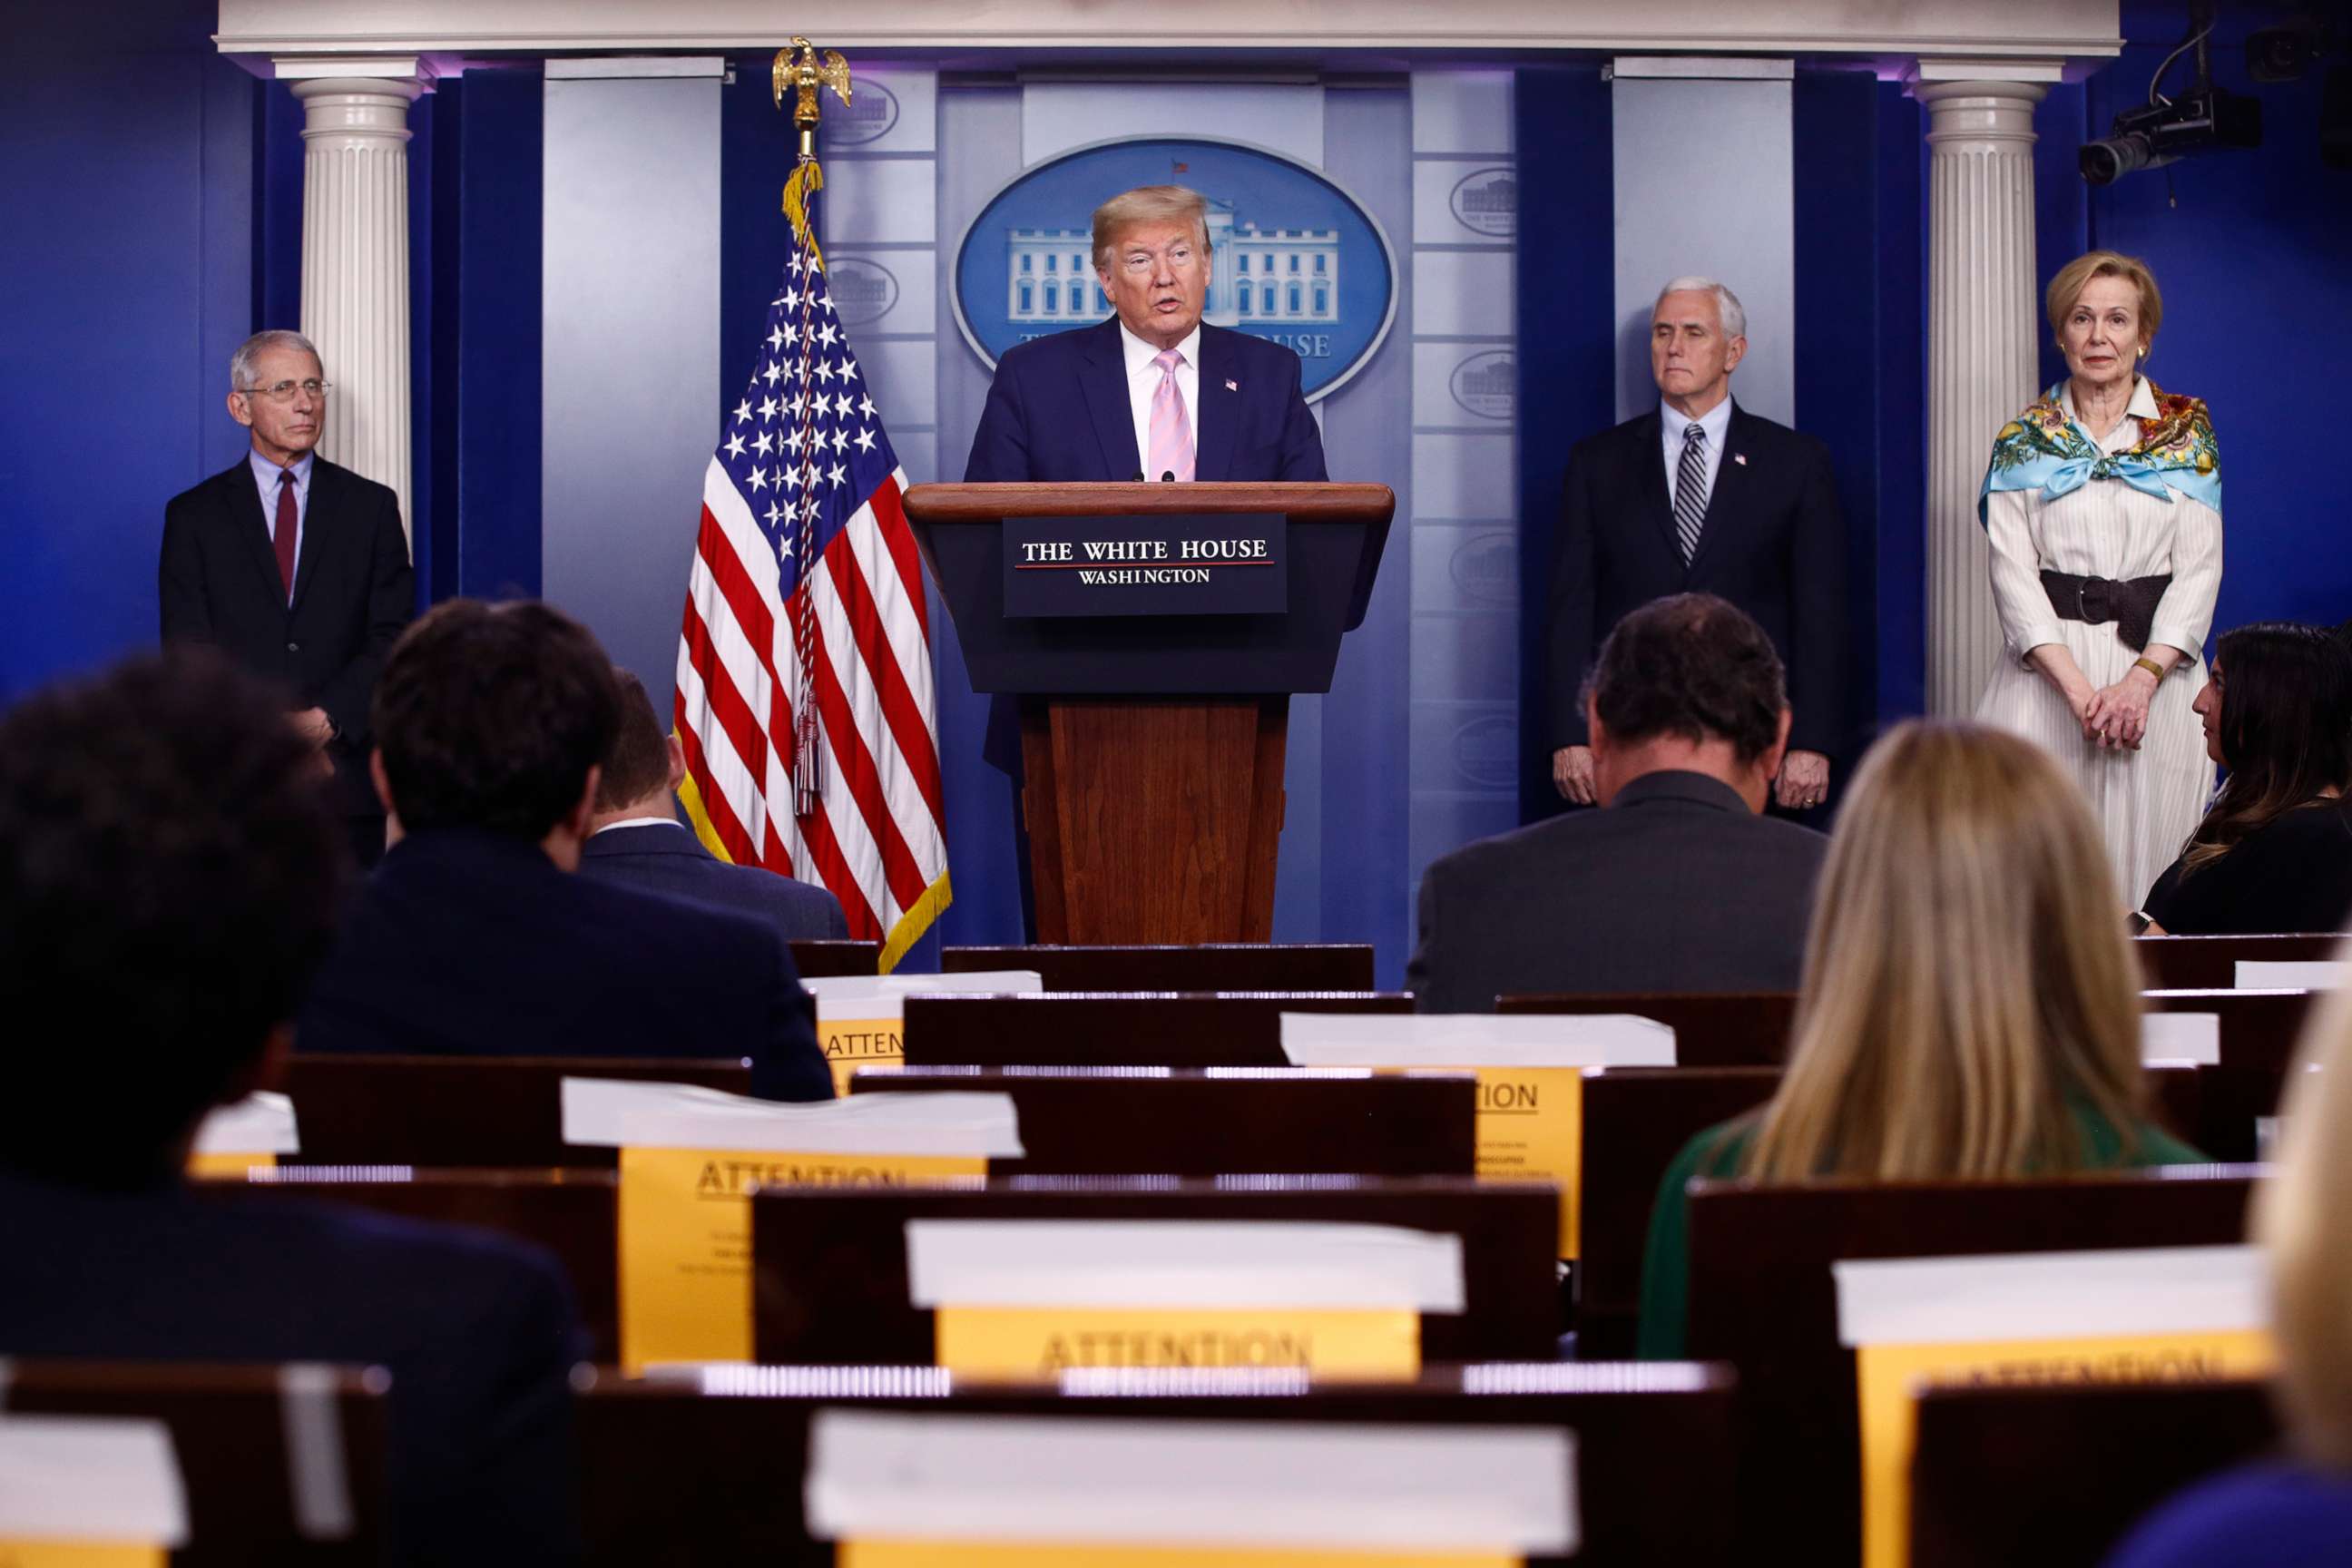 PHOTO: In this April 4, 2020, file photo, President Donald Trump speaks during a coronavirus task force briefing at the White House, in Washington.